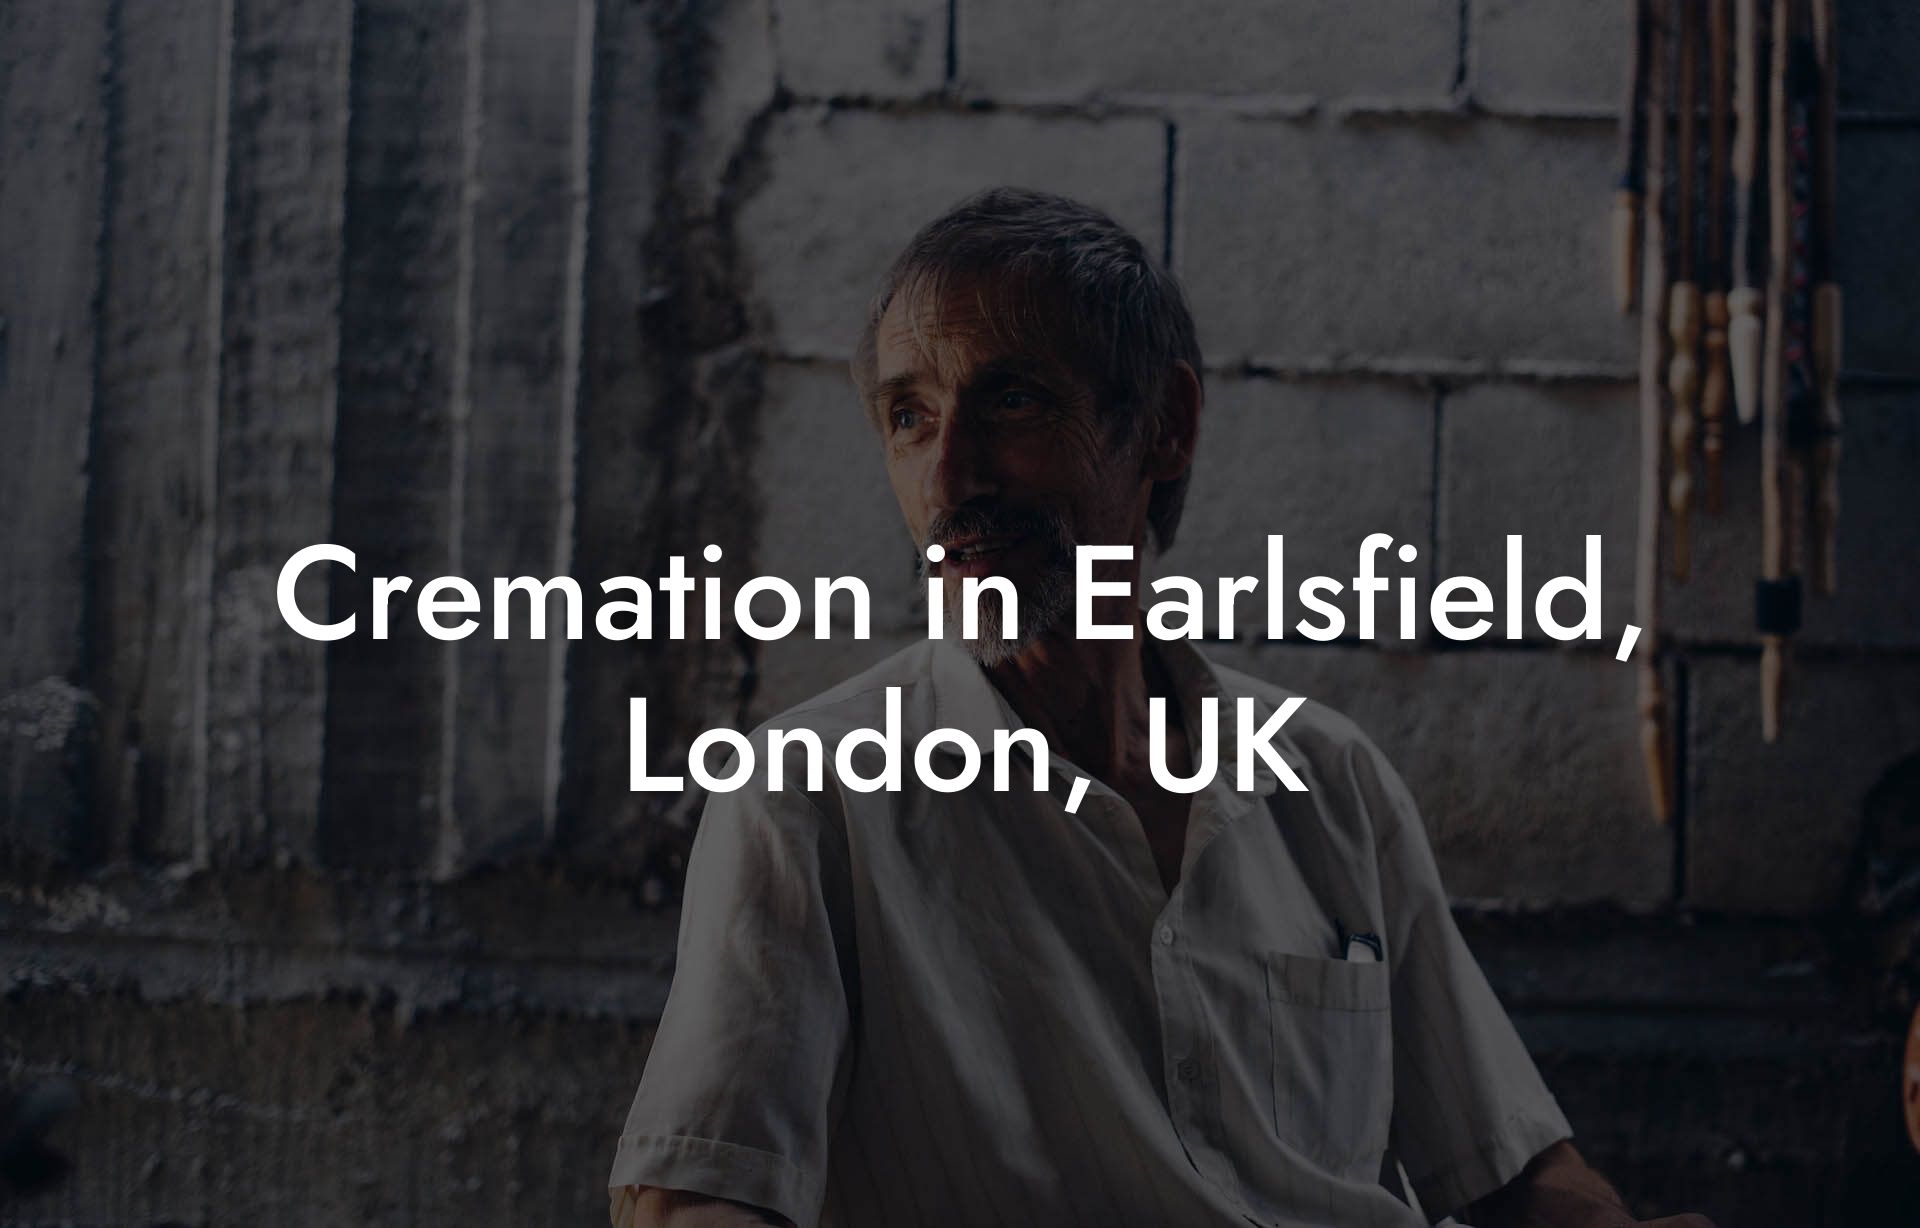 Cremation in Earlsfield, London, UK